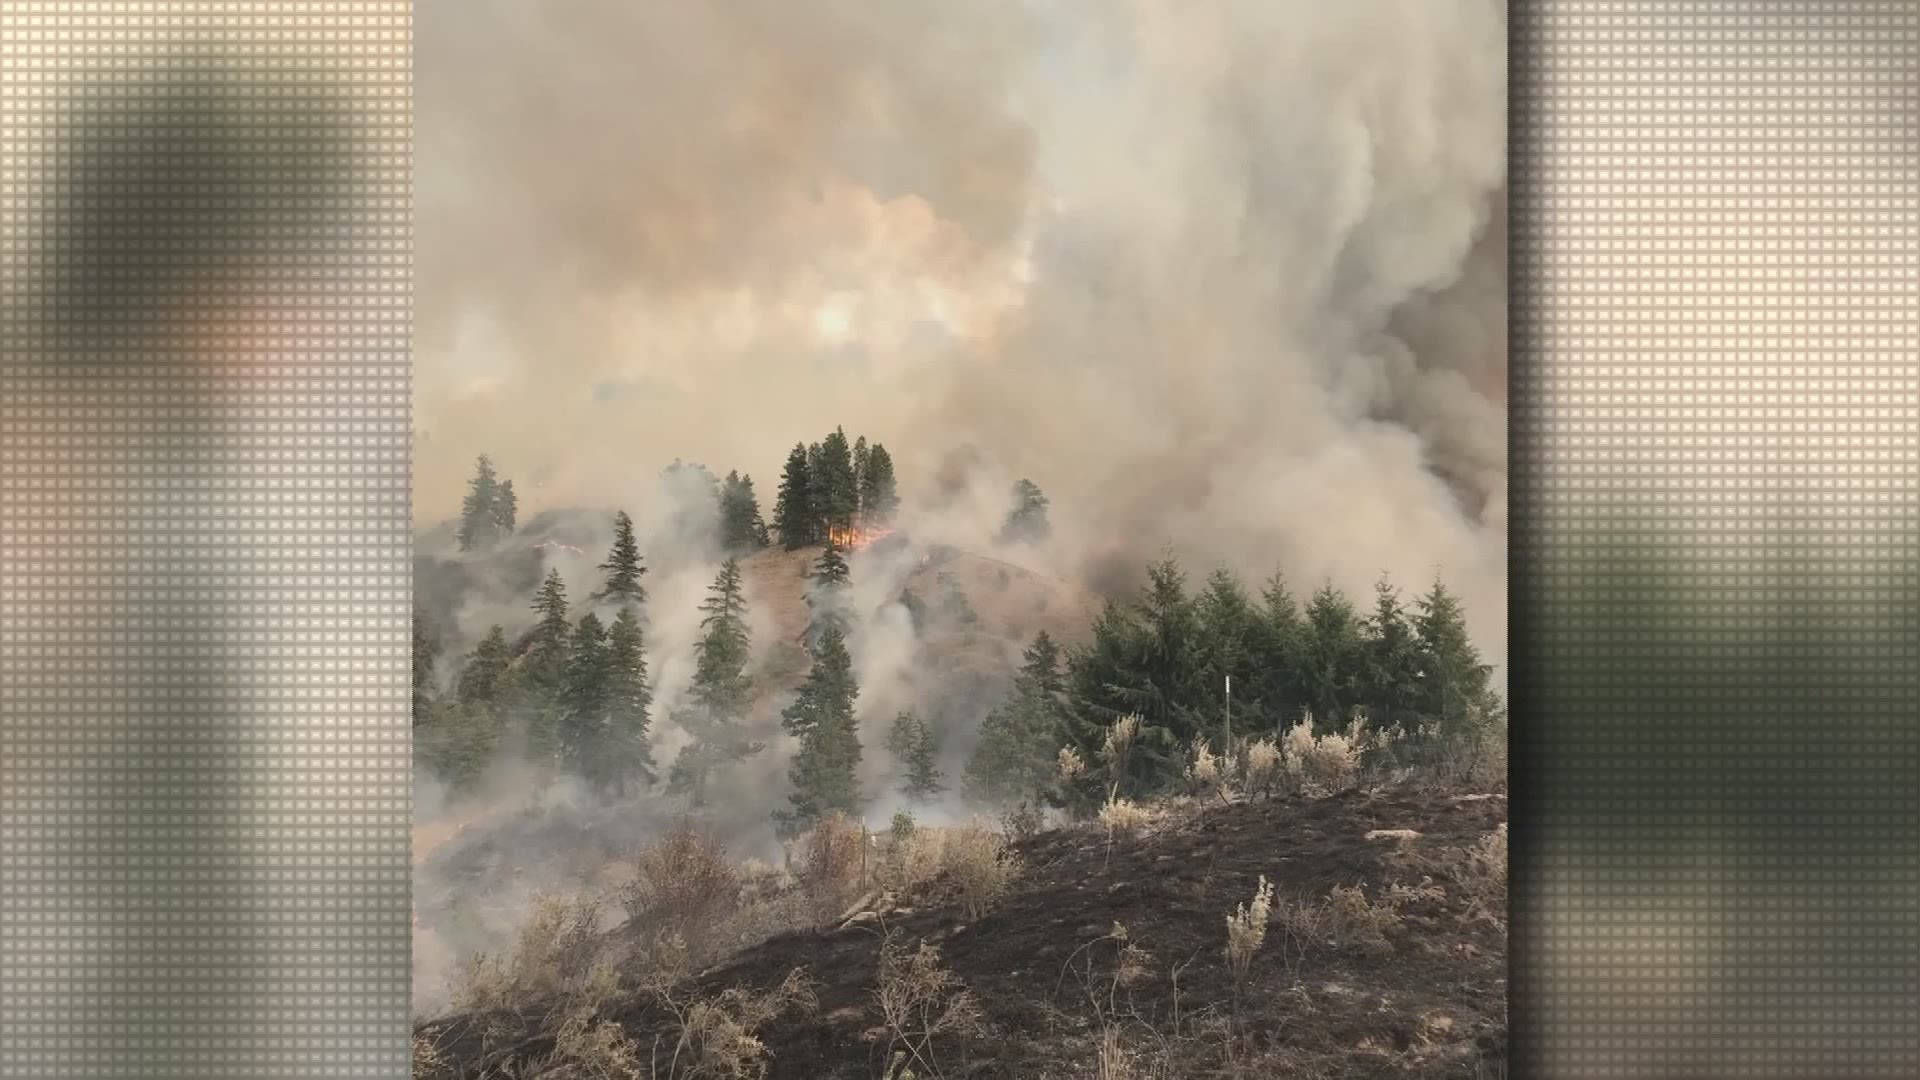 The Chelan Hills Fire has burned 1,842 acres as of July 31, 2018.